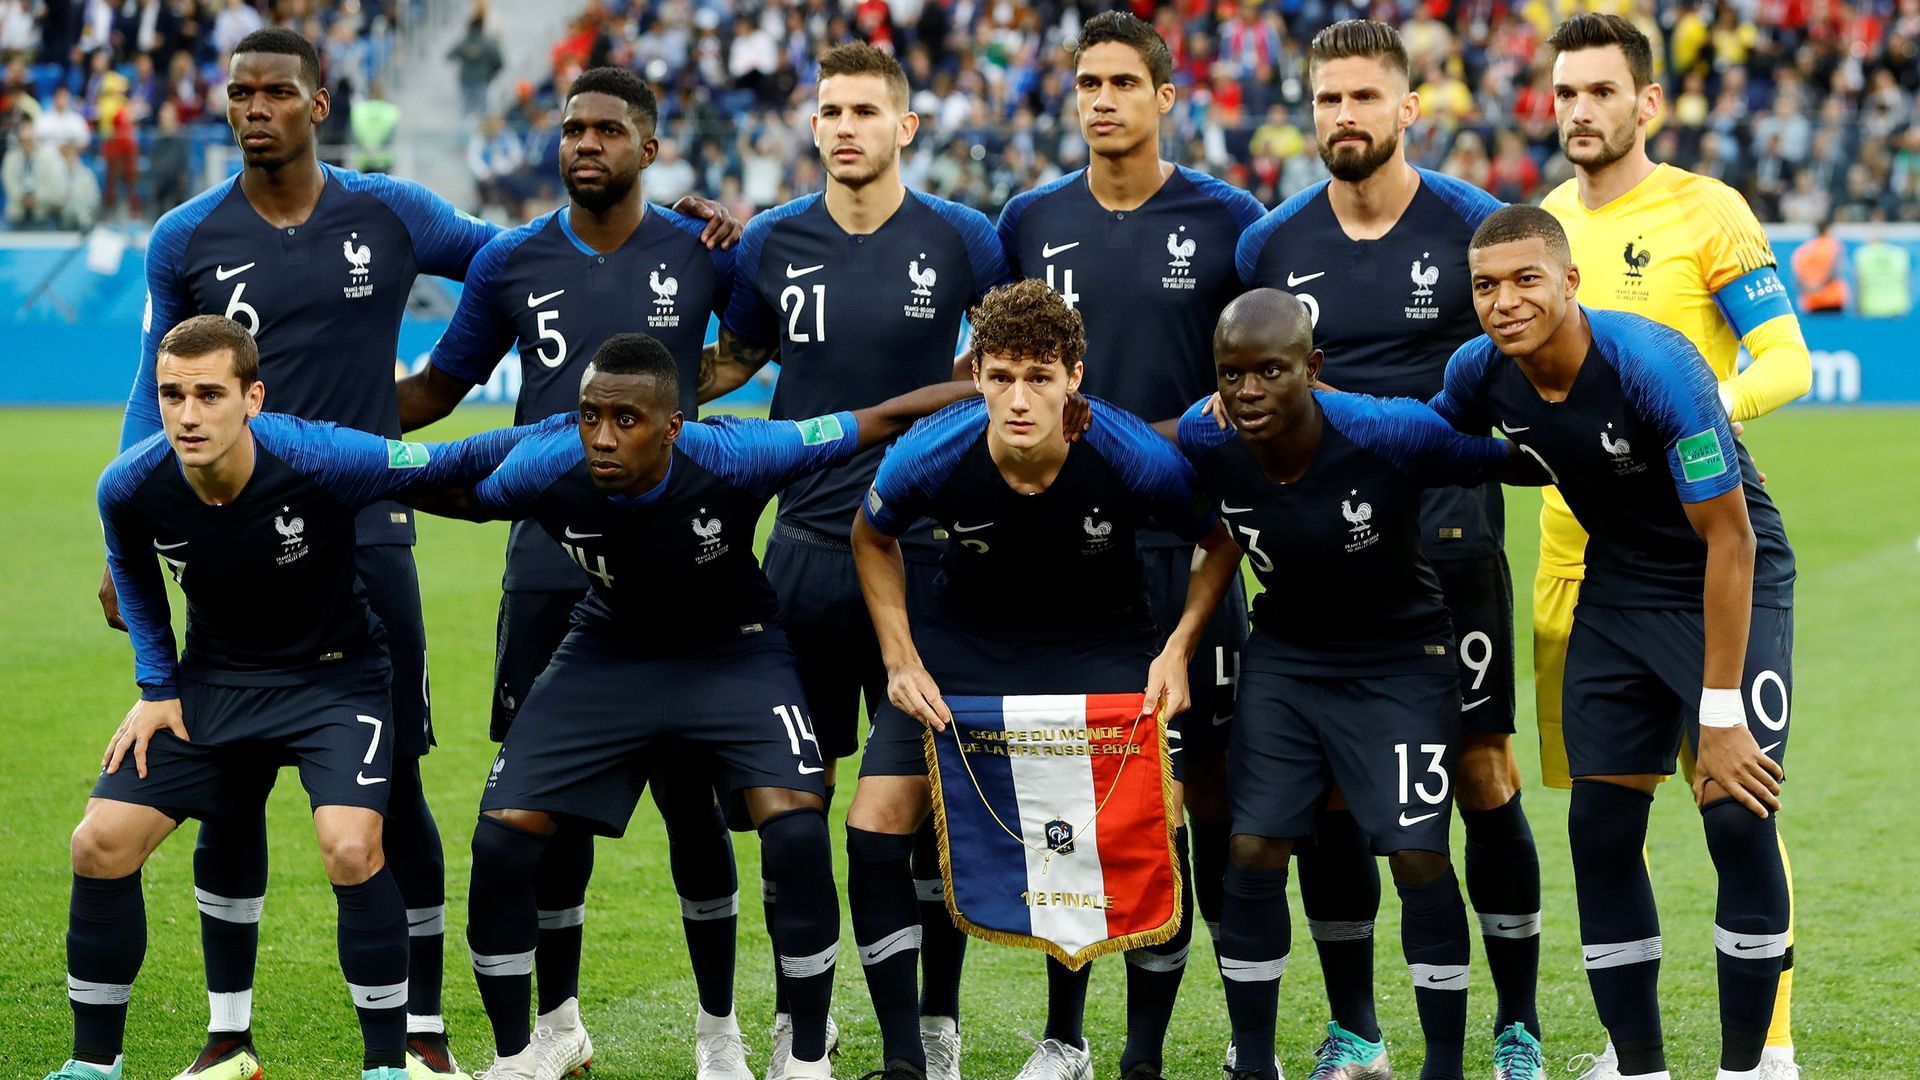 Players of France's soccer team. 